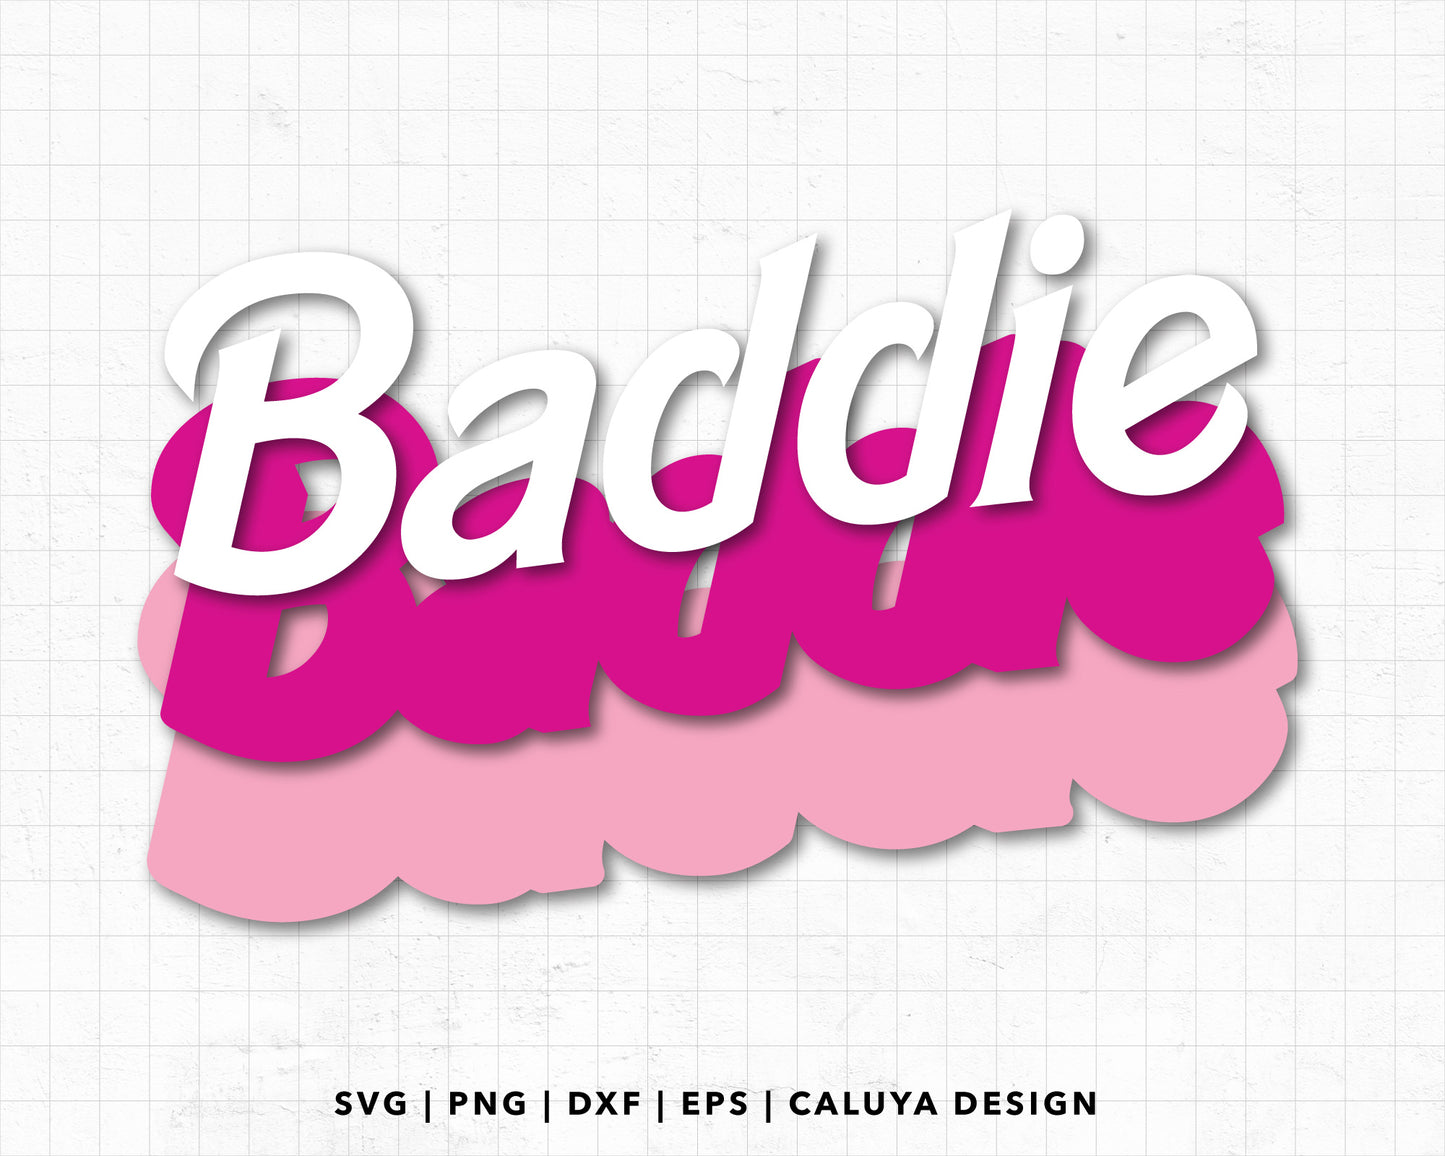 FREE Baddie SVG | Barbie Inspired SVG Cut File for Cricut, Cameo Silhouette | Free SVG Cut File